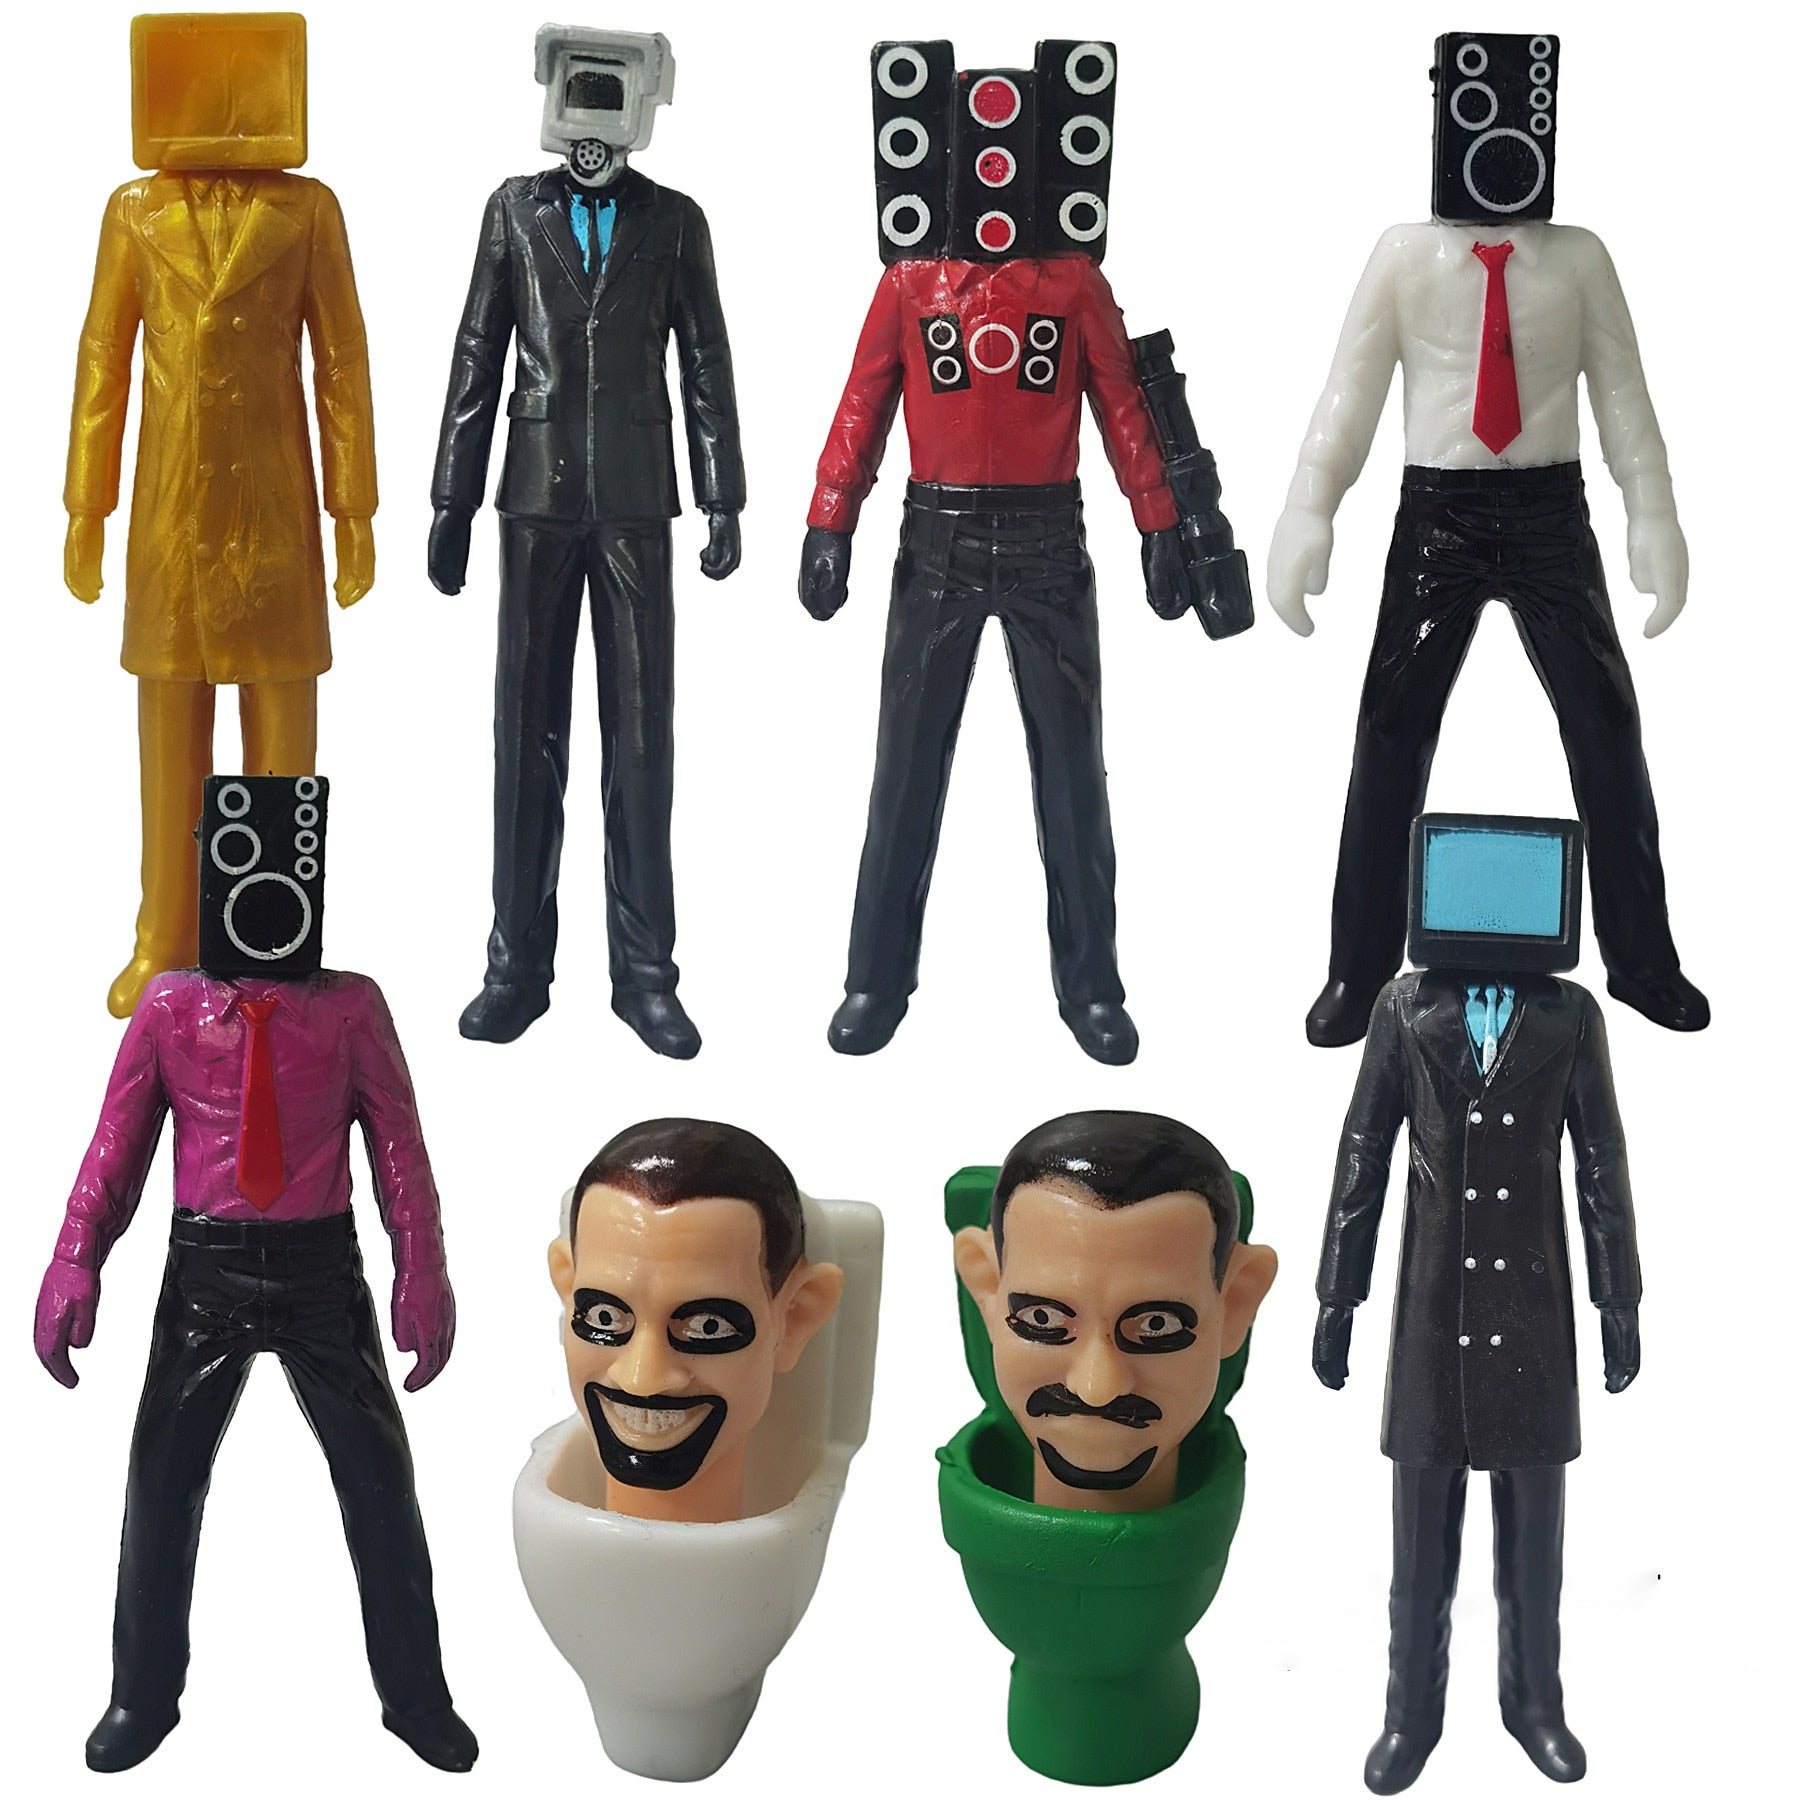 Skibidi Toilet Action Figure Set: A Fun and Quirky Gift for Kids of All Ages